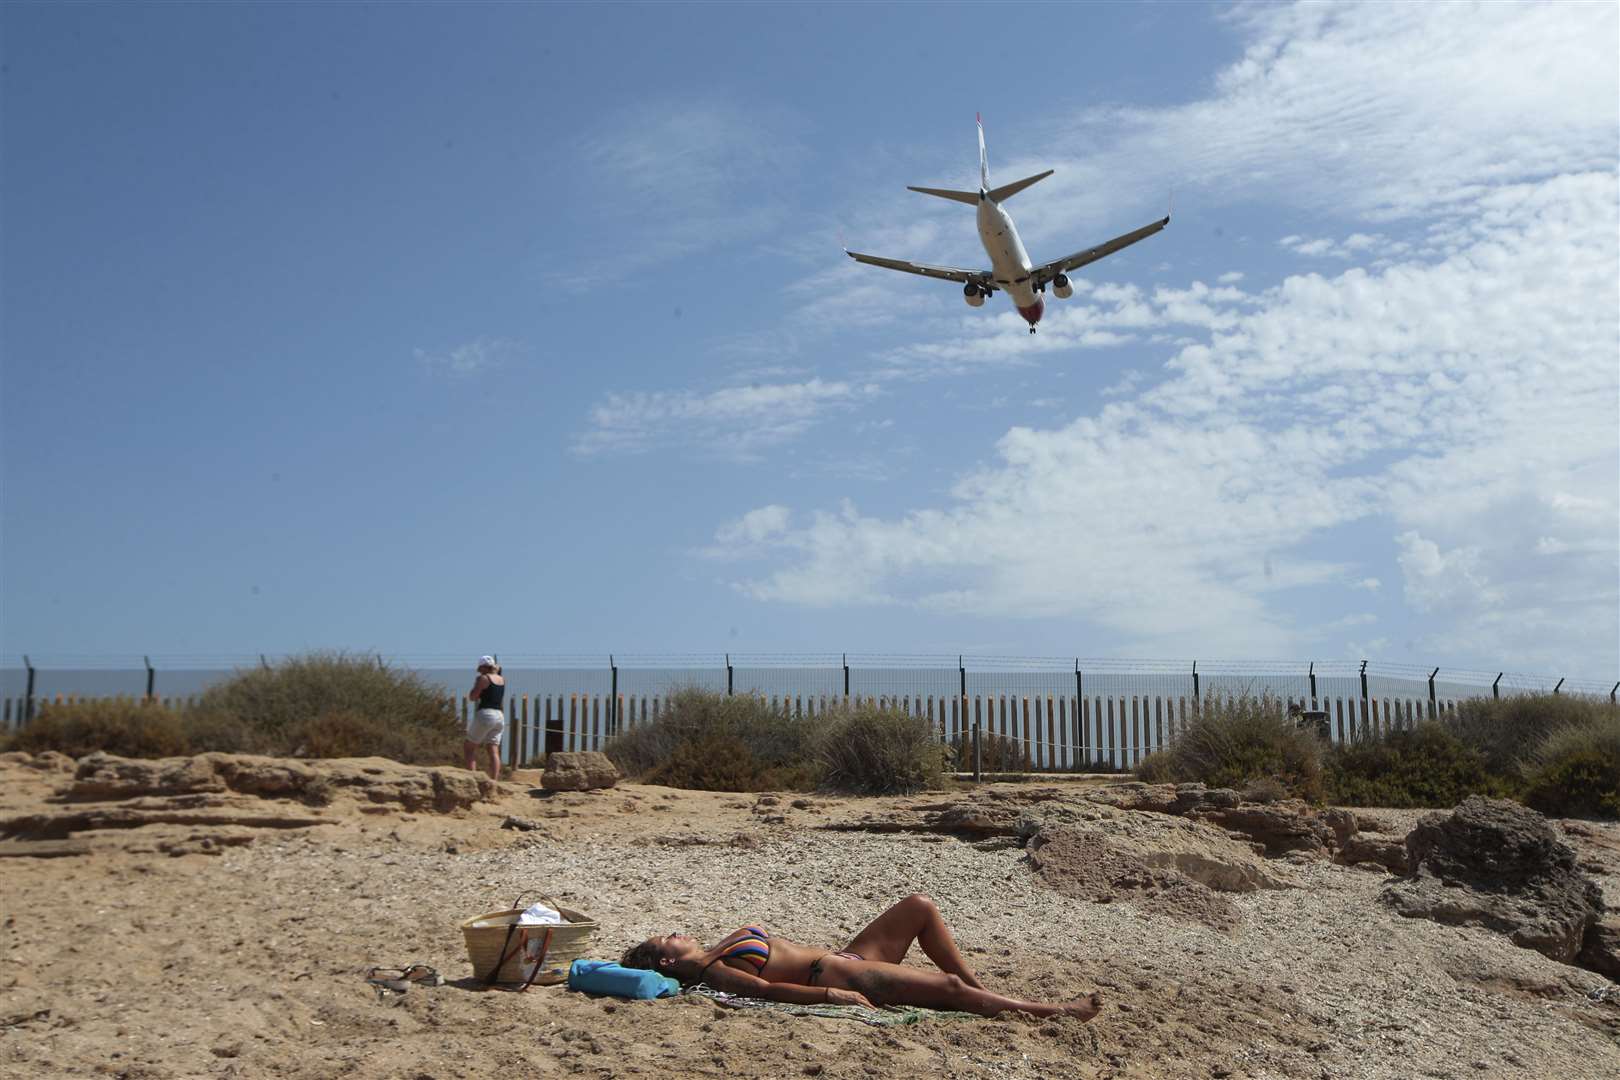 Those holidaying in Spain or its islands have to stay at home for 14 days afterwards following a change in Government rules (Joan Mateu/AP)